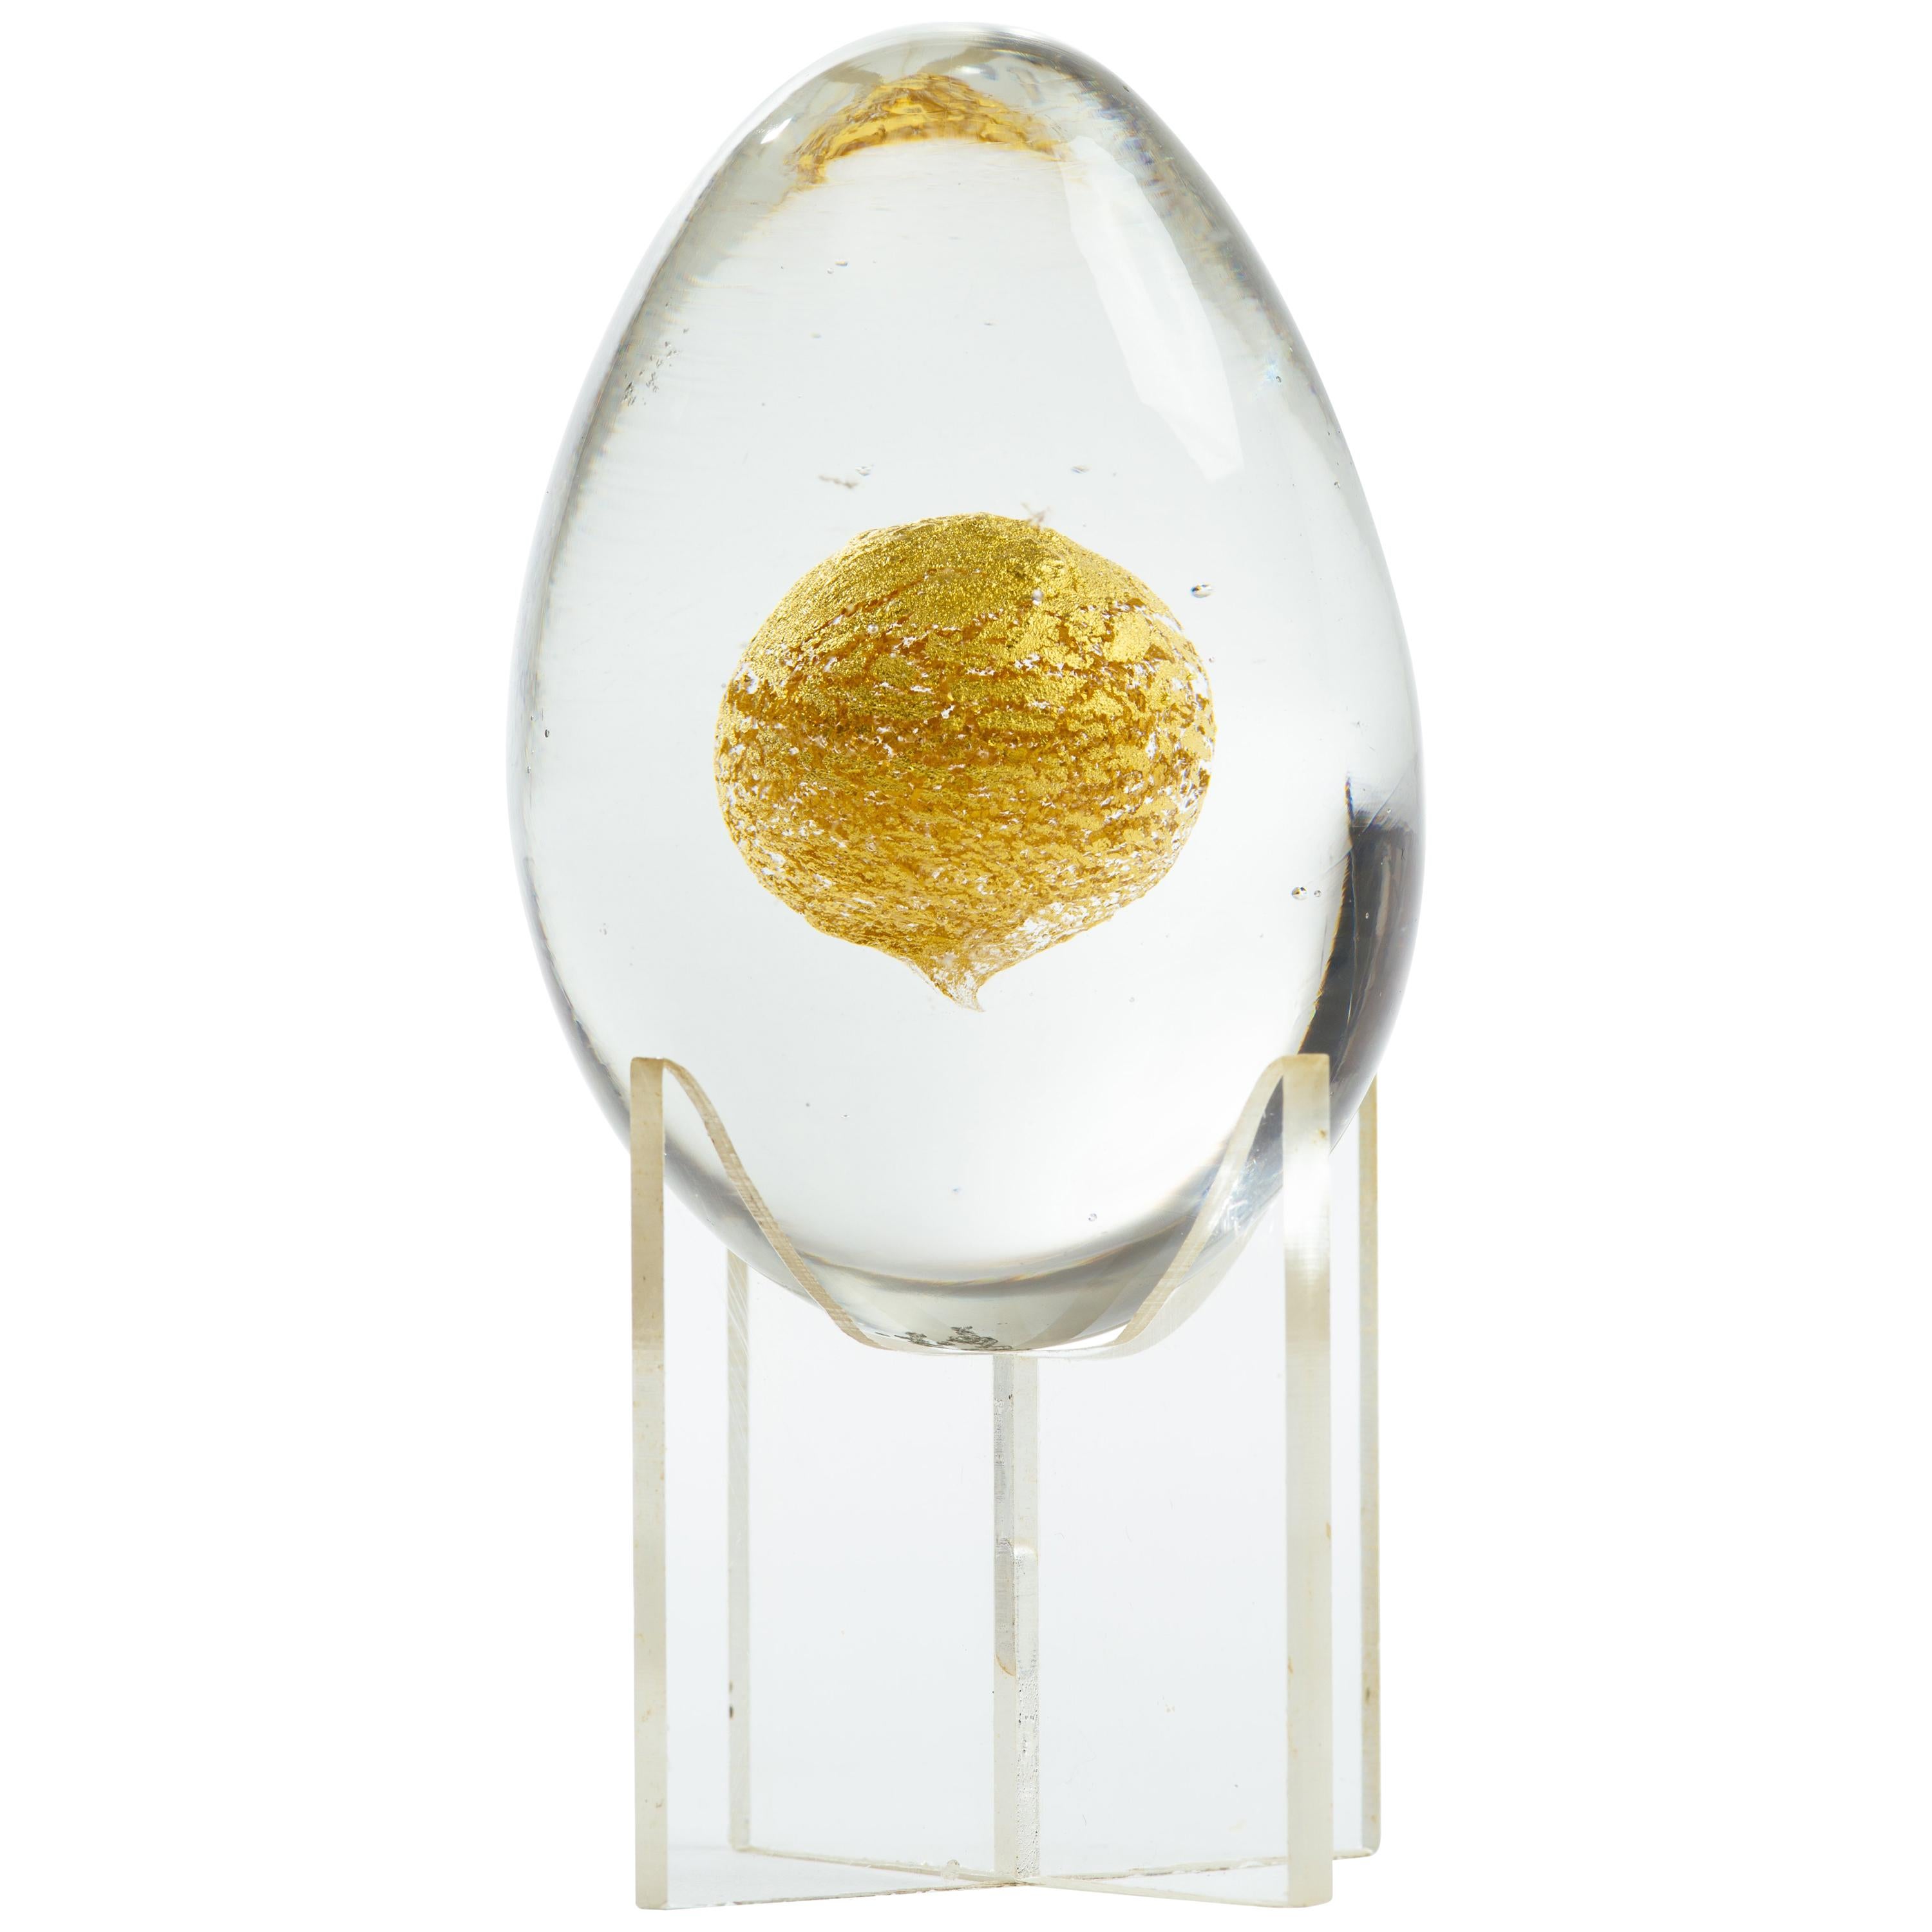 Italian handblown glass egg paperweight sculpture. 24-karat gold orb inclusion with lucite stand,
 Engraved signature on bottom, Venini, Italia. Glass egg without stand measures 2.5 inches height x 2 inches diameter.